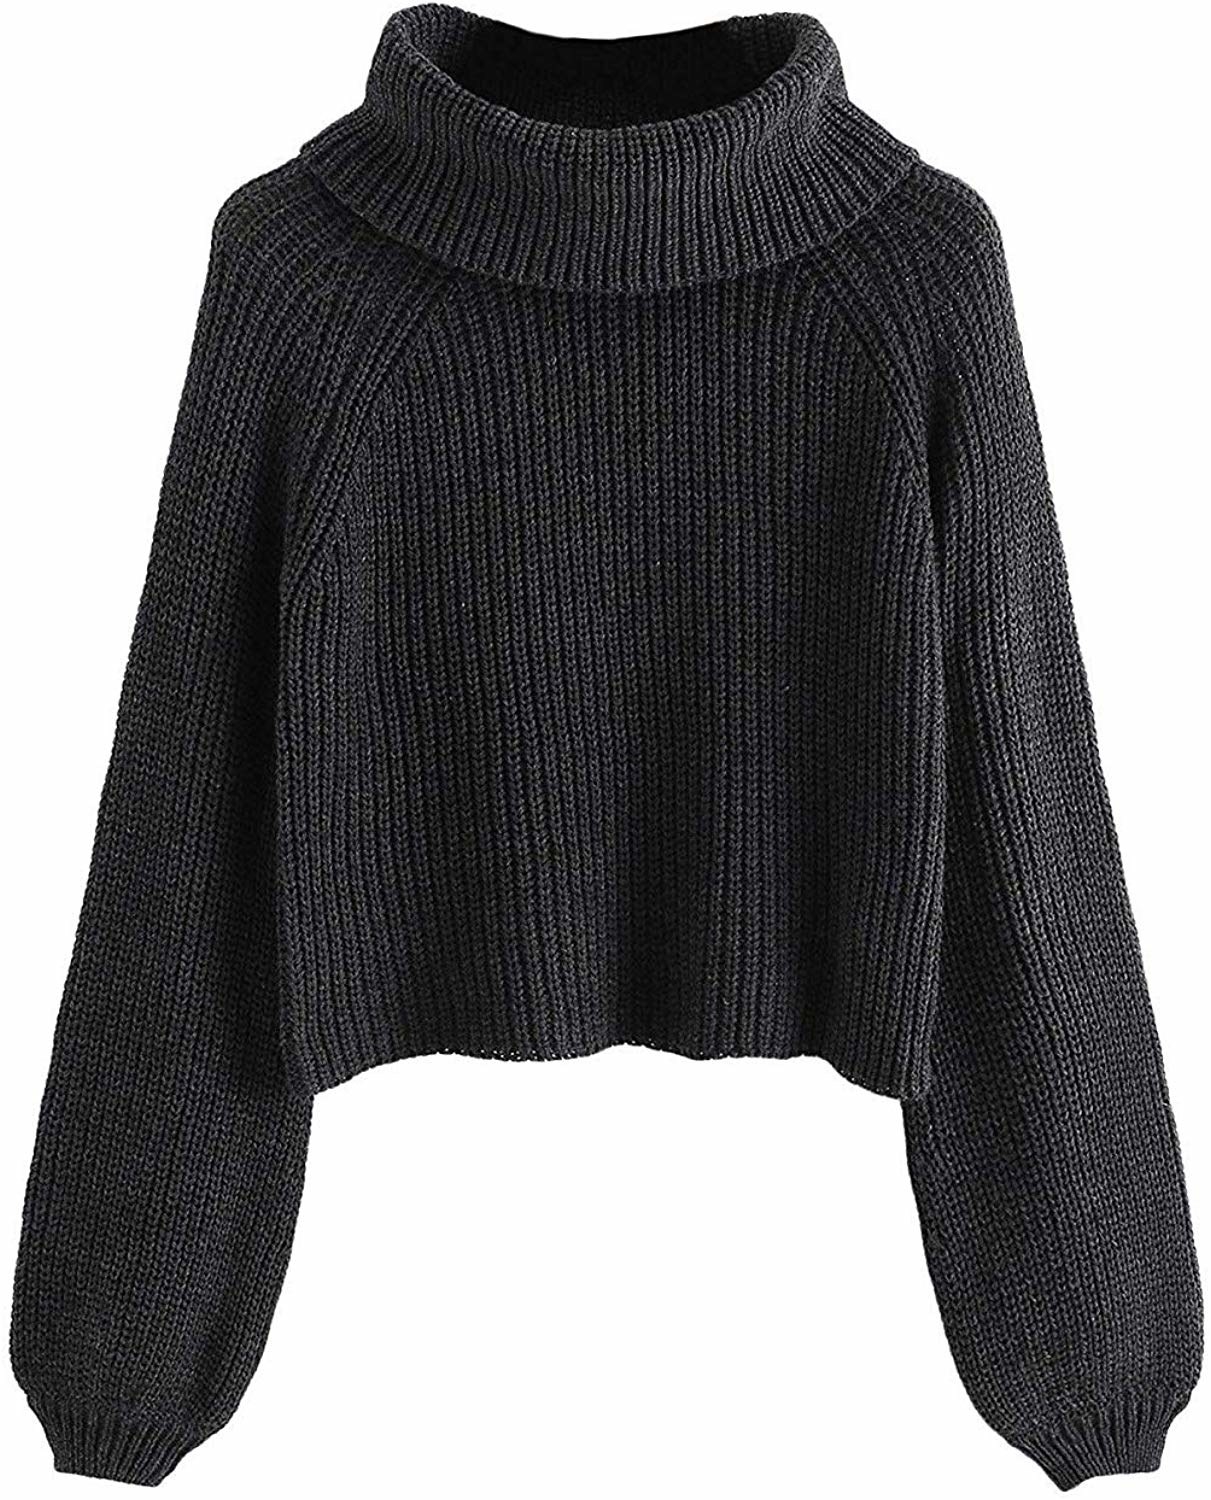 25 Sweaters And Sweatshirts For Anyone Who Wants To Be Comfy And Look Cute